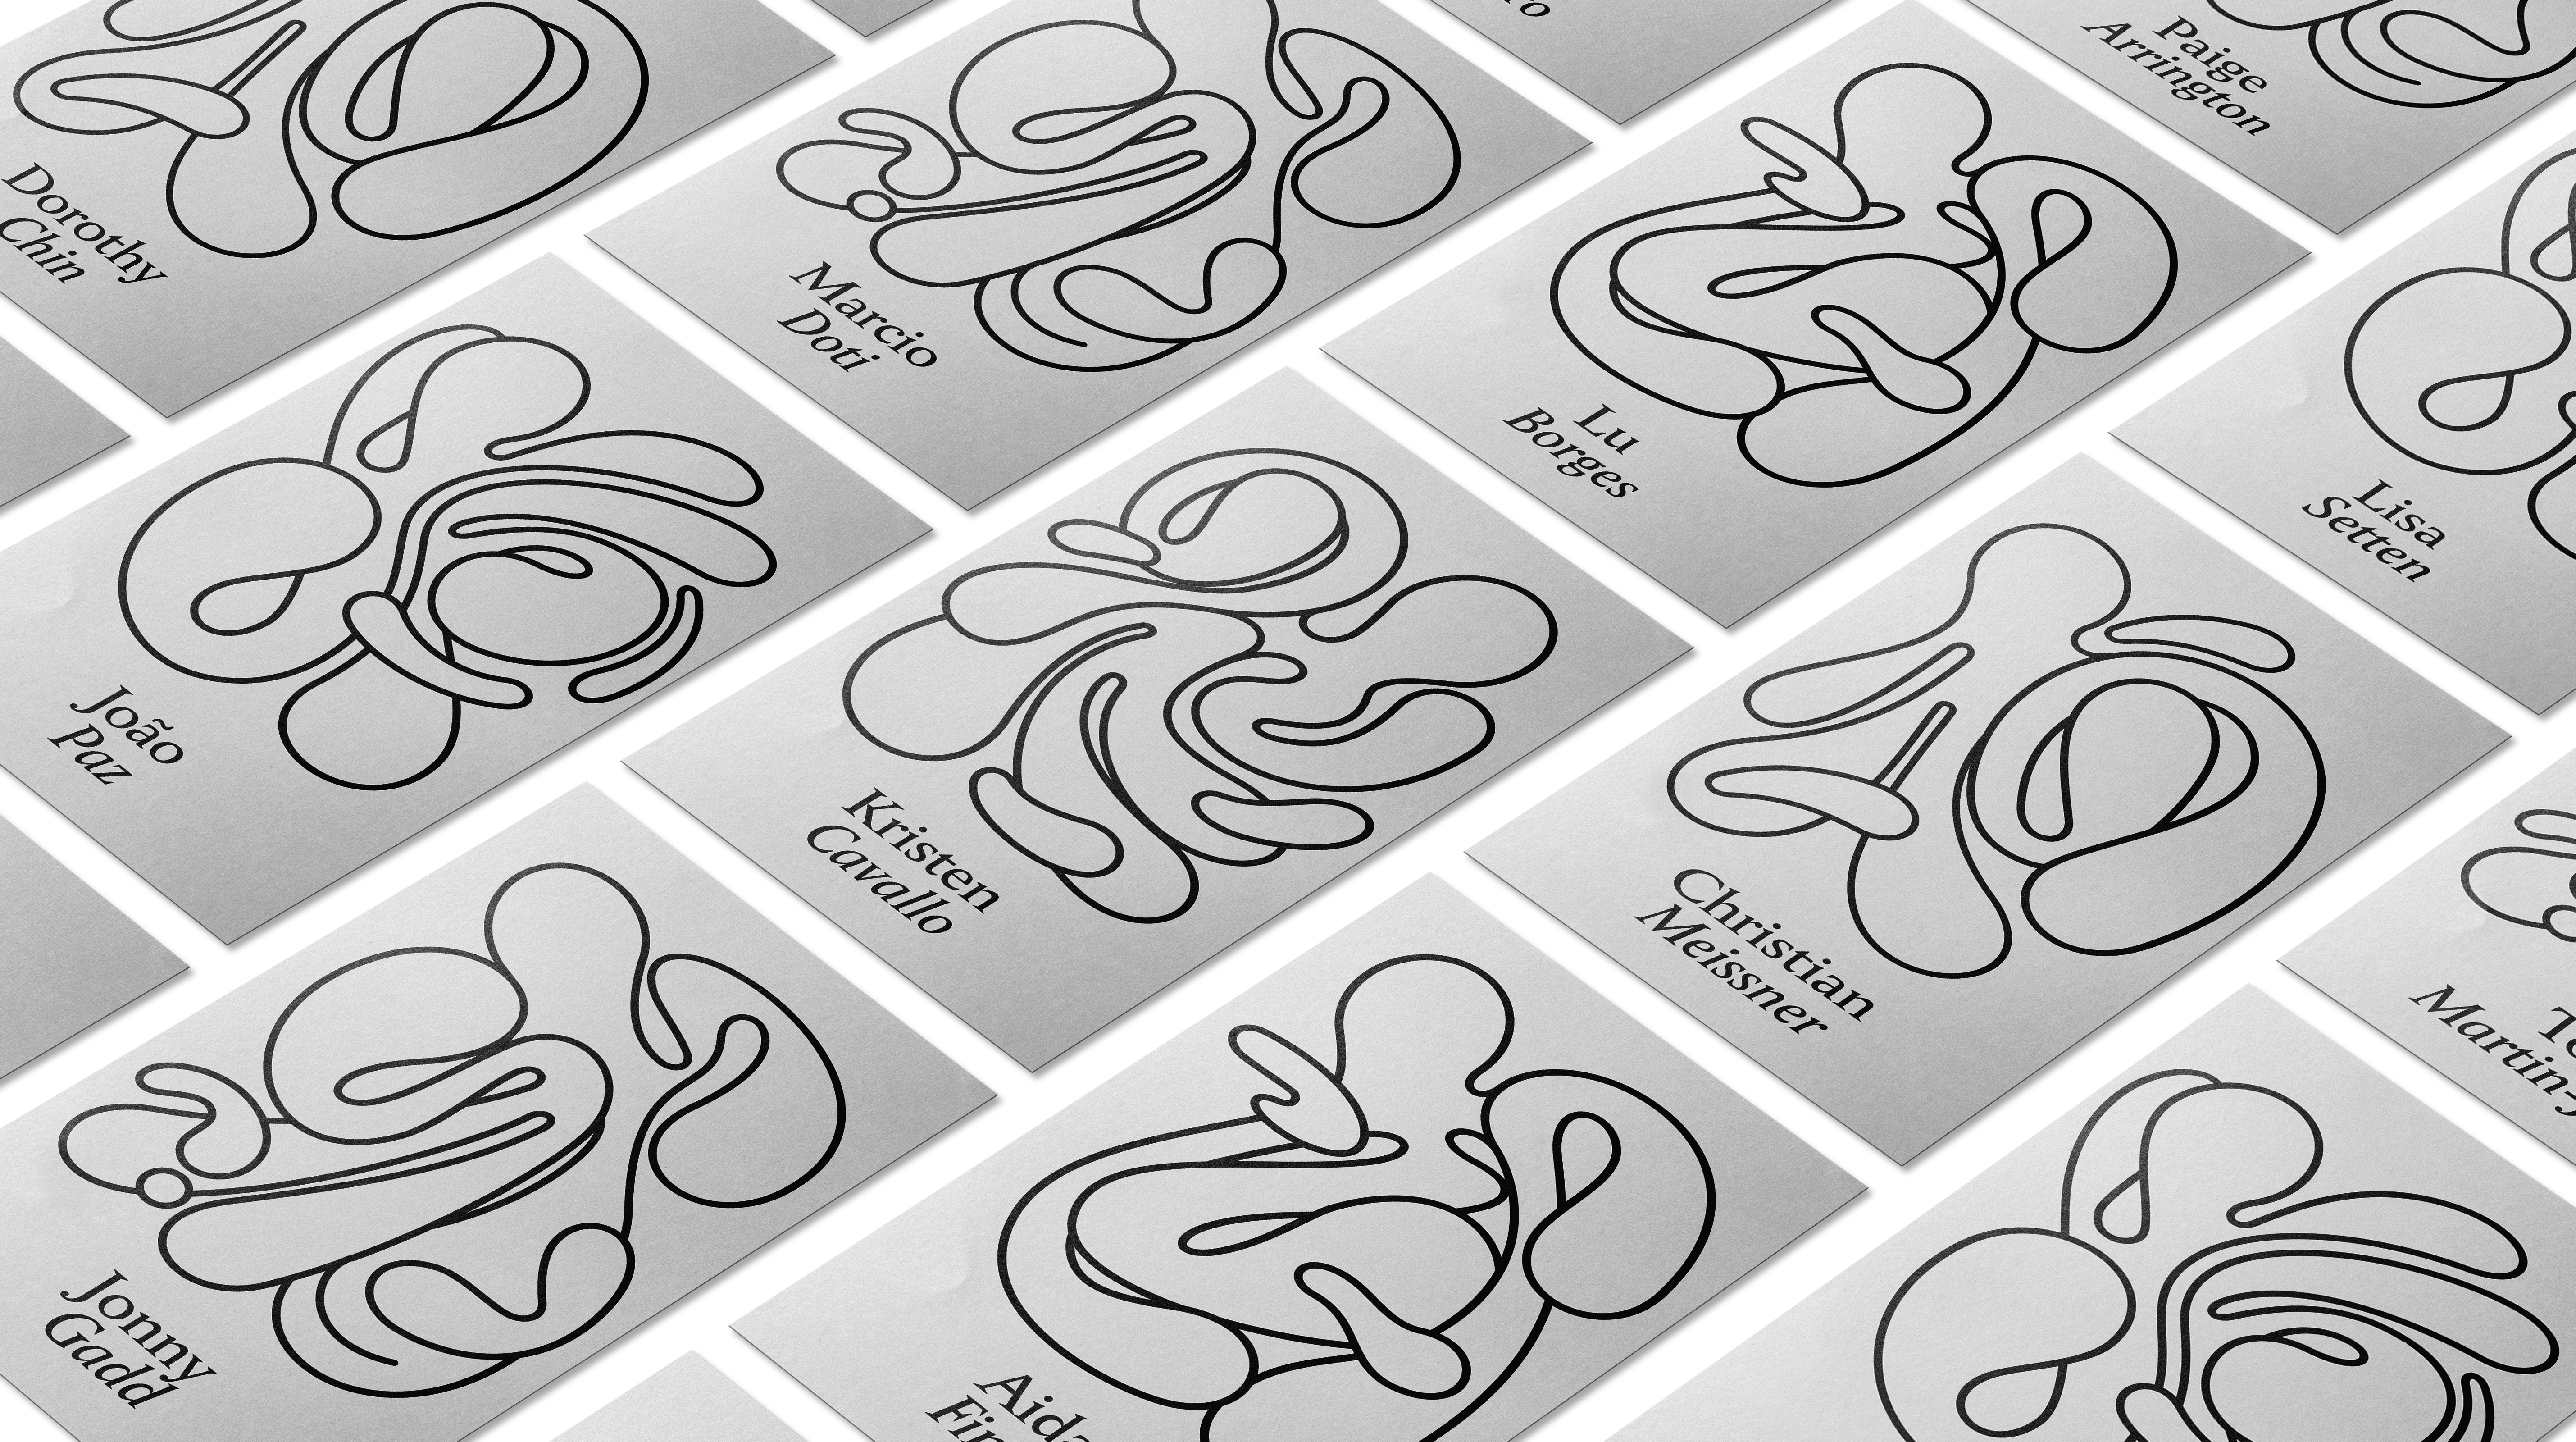 Octopus Business Cards